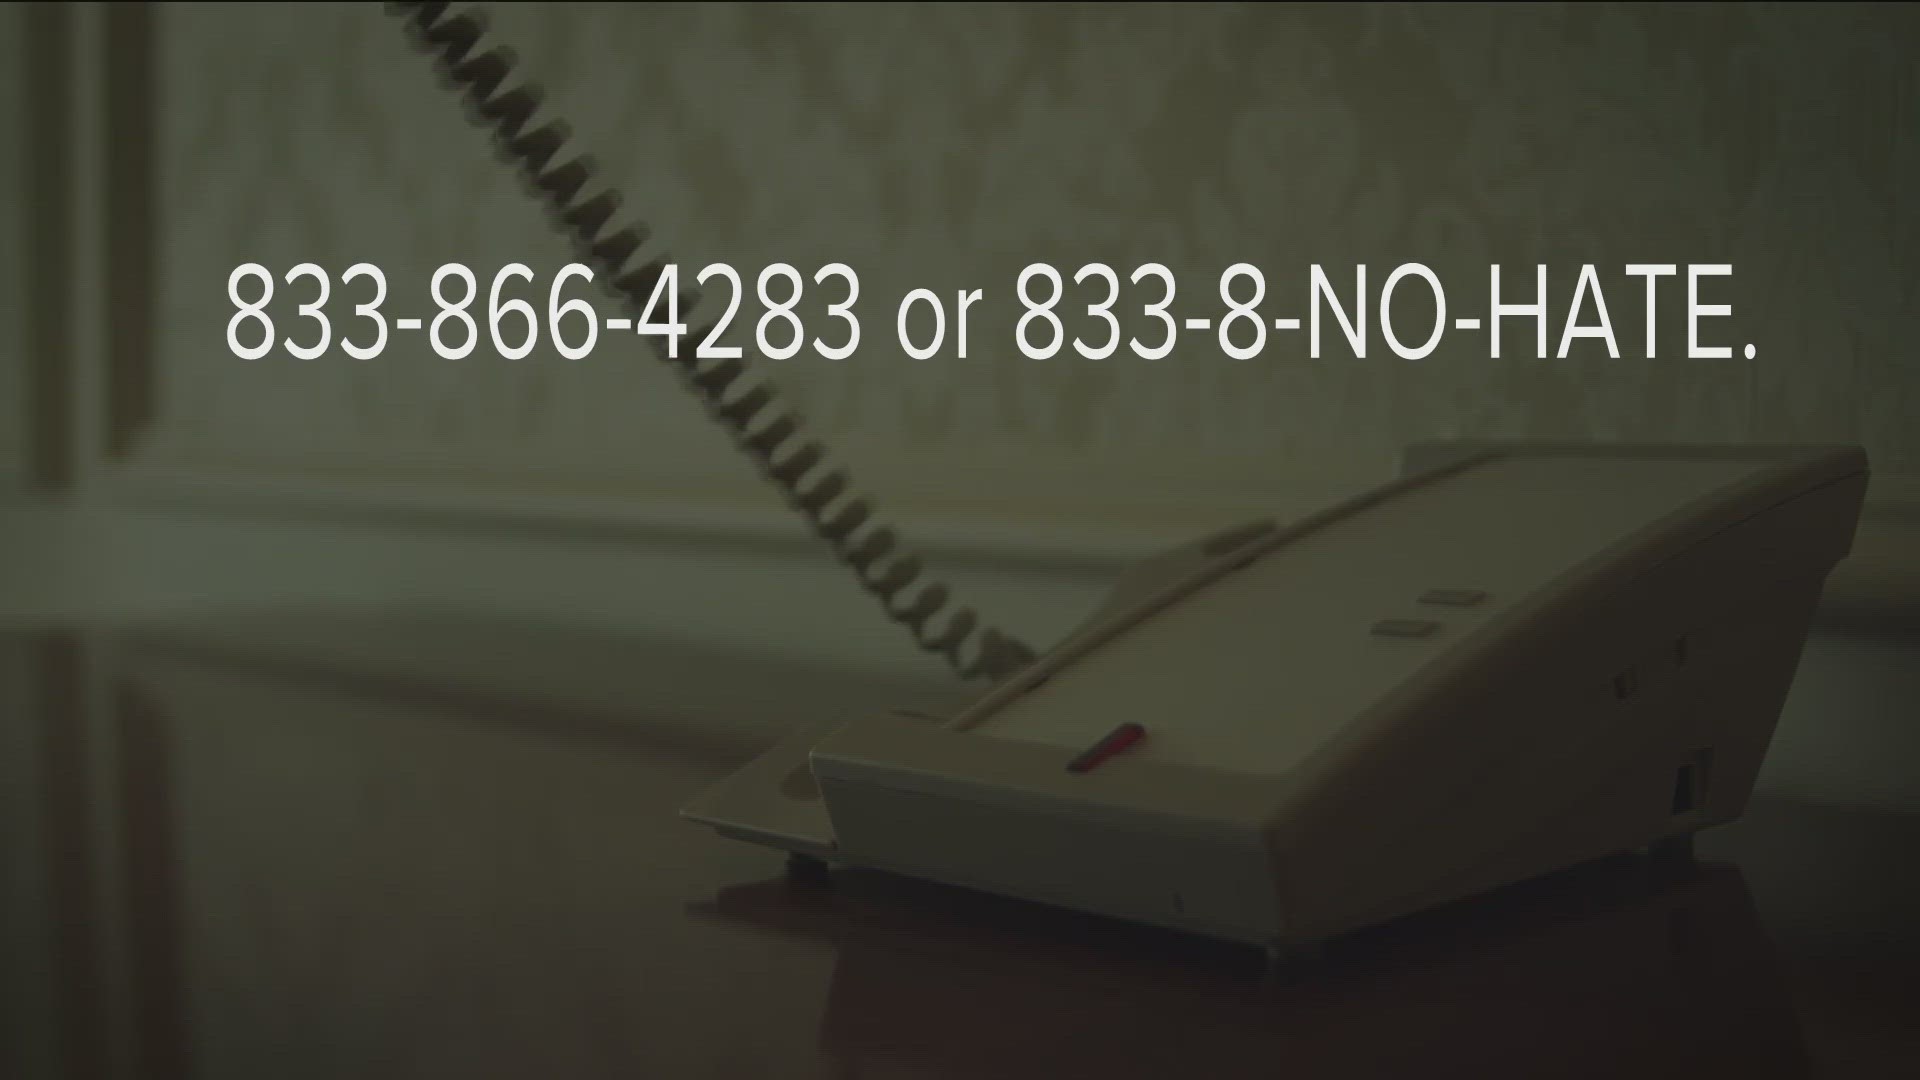 California has a new hotline number for hate crime.